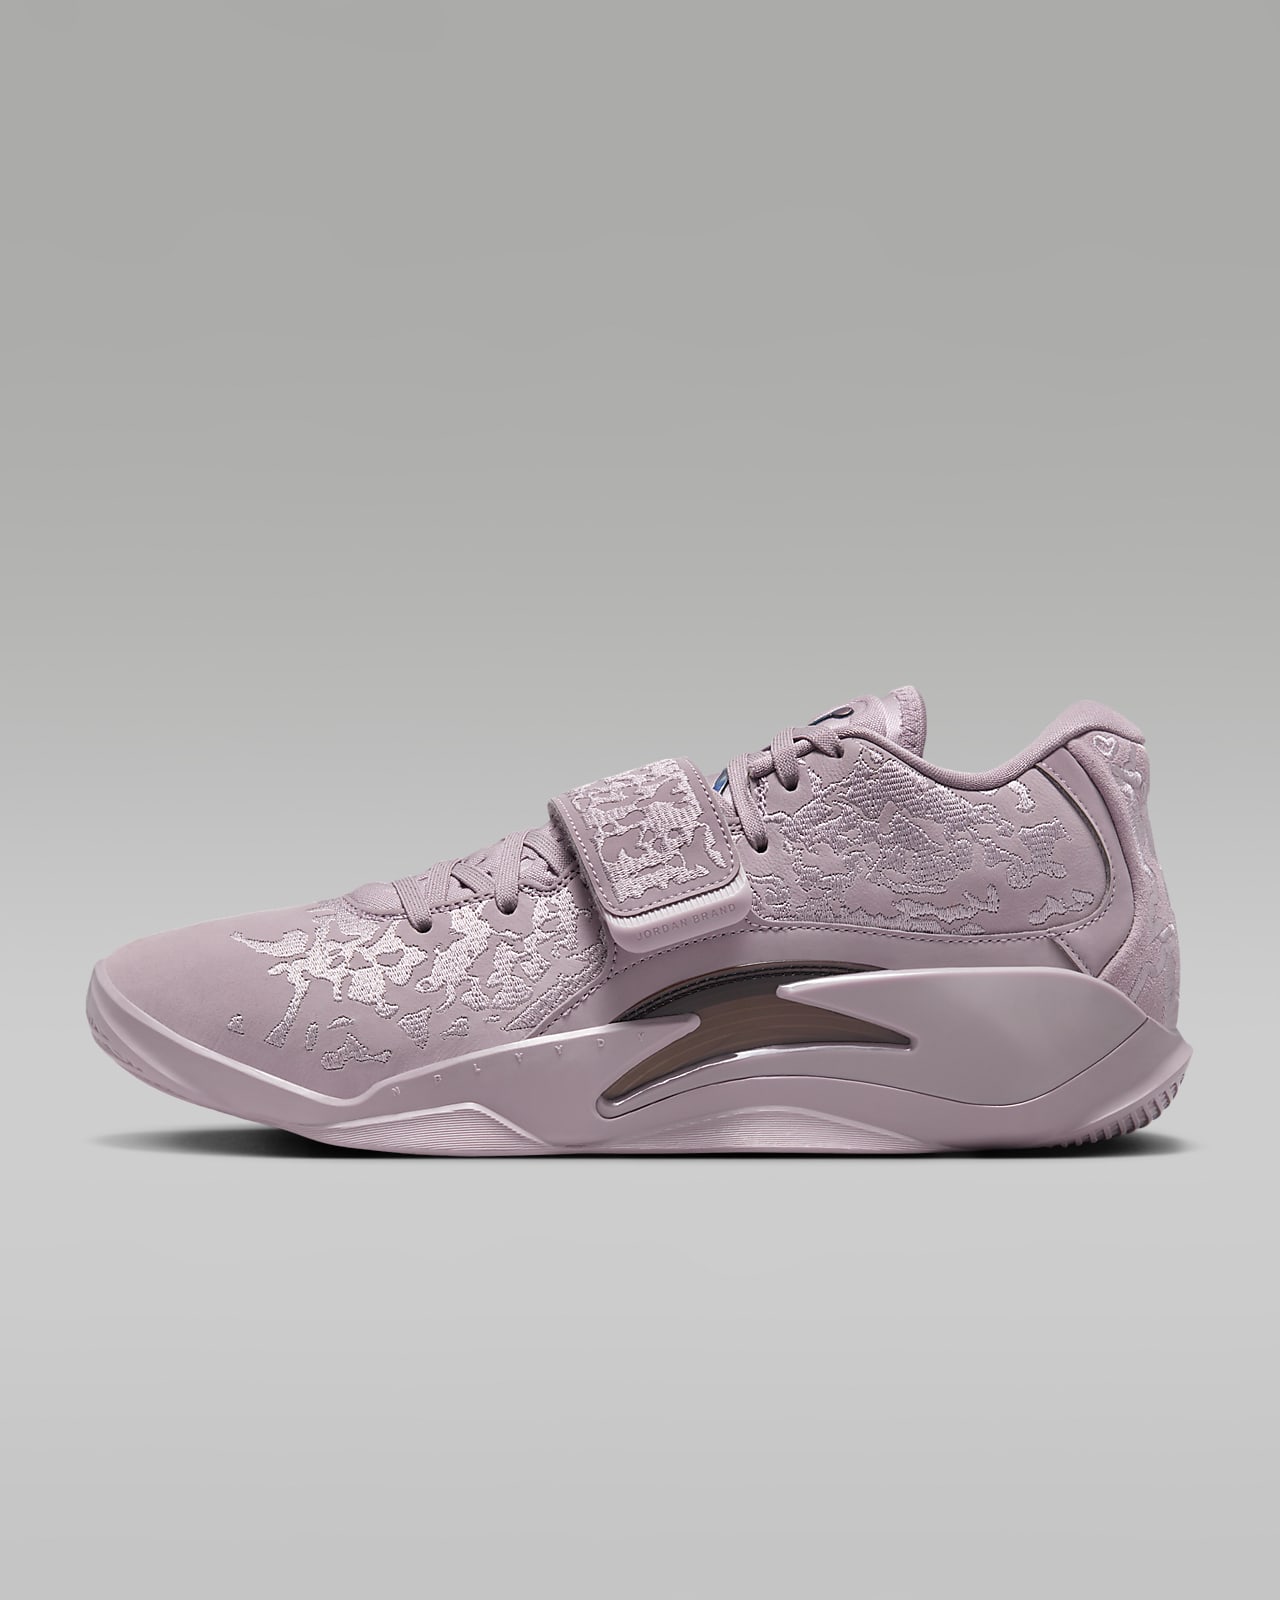 Zion 3 "Orchid" SE PF Basketball Shoes